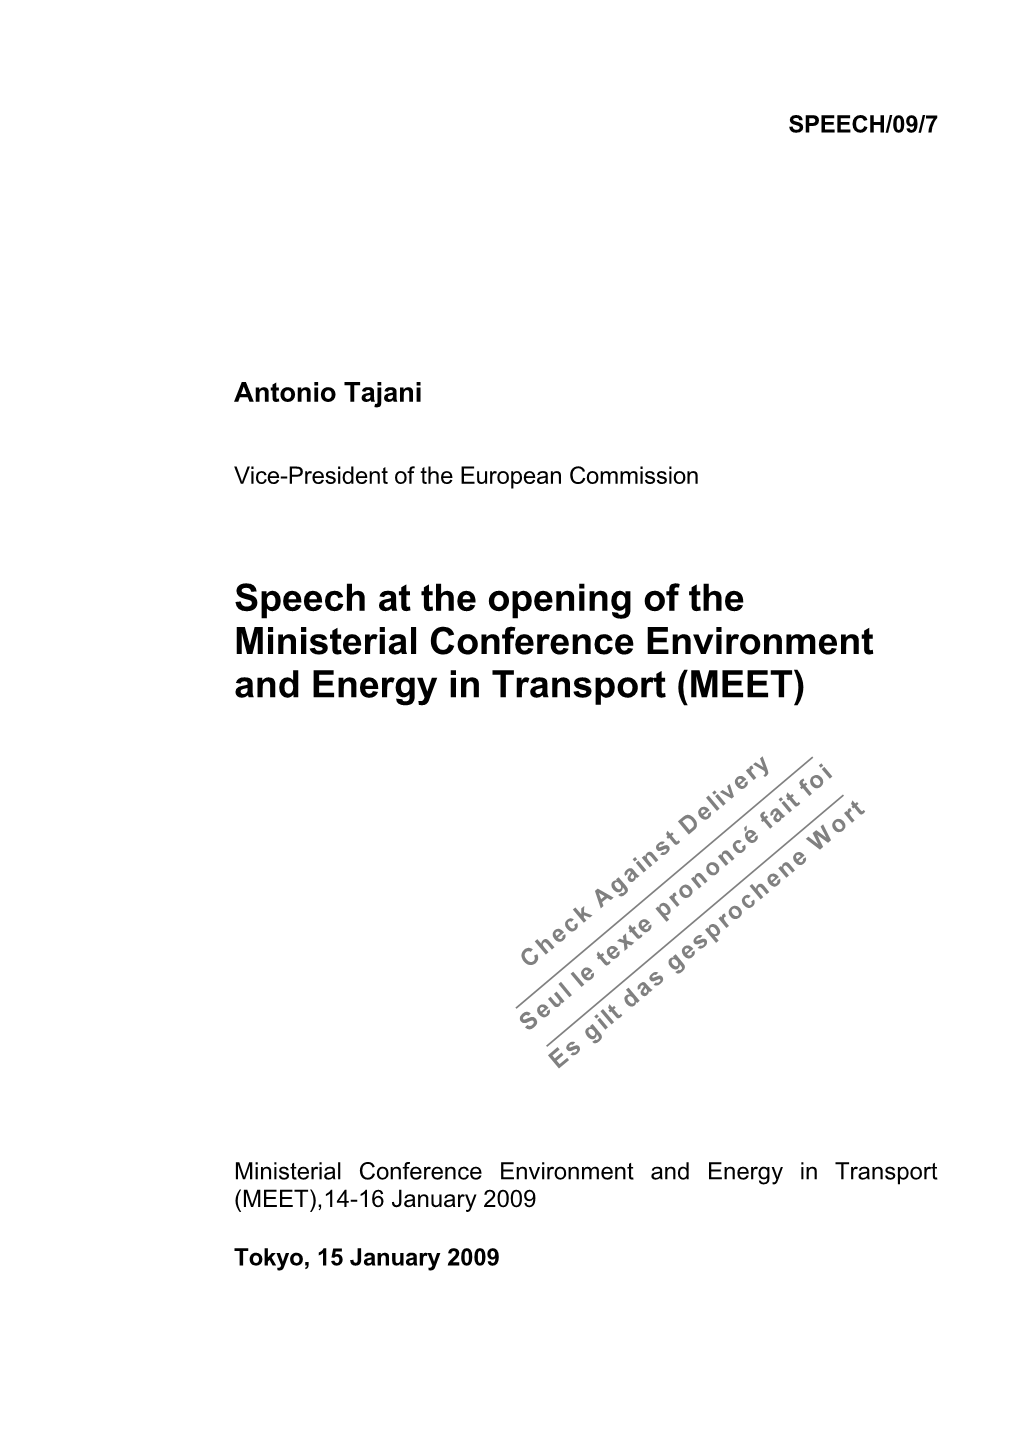 Speech at the Opening of the Ministerial Conference Environment and Energy in Transport (MEET)